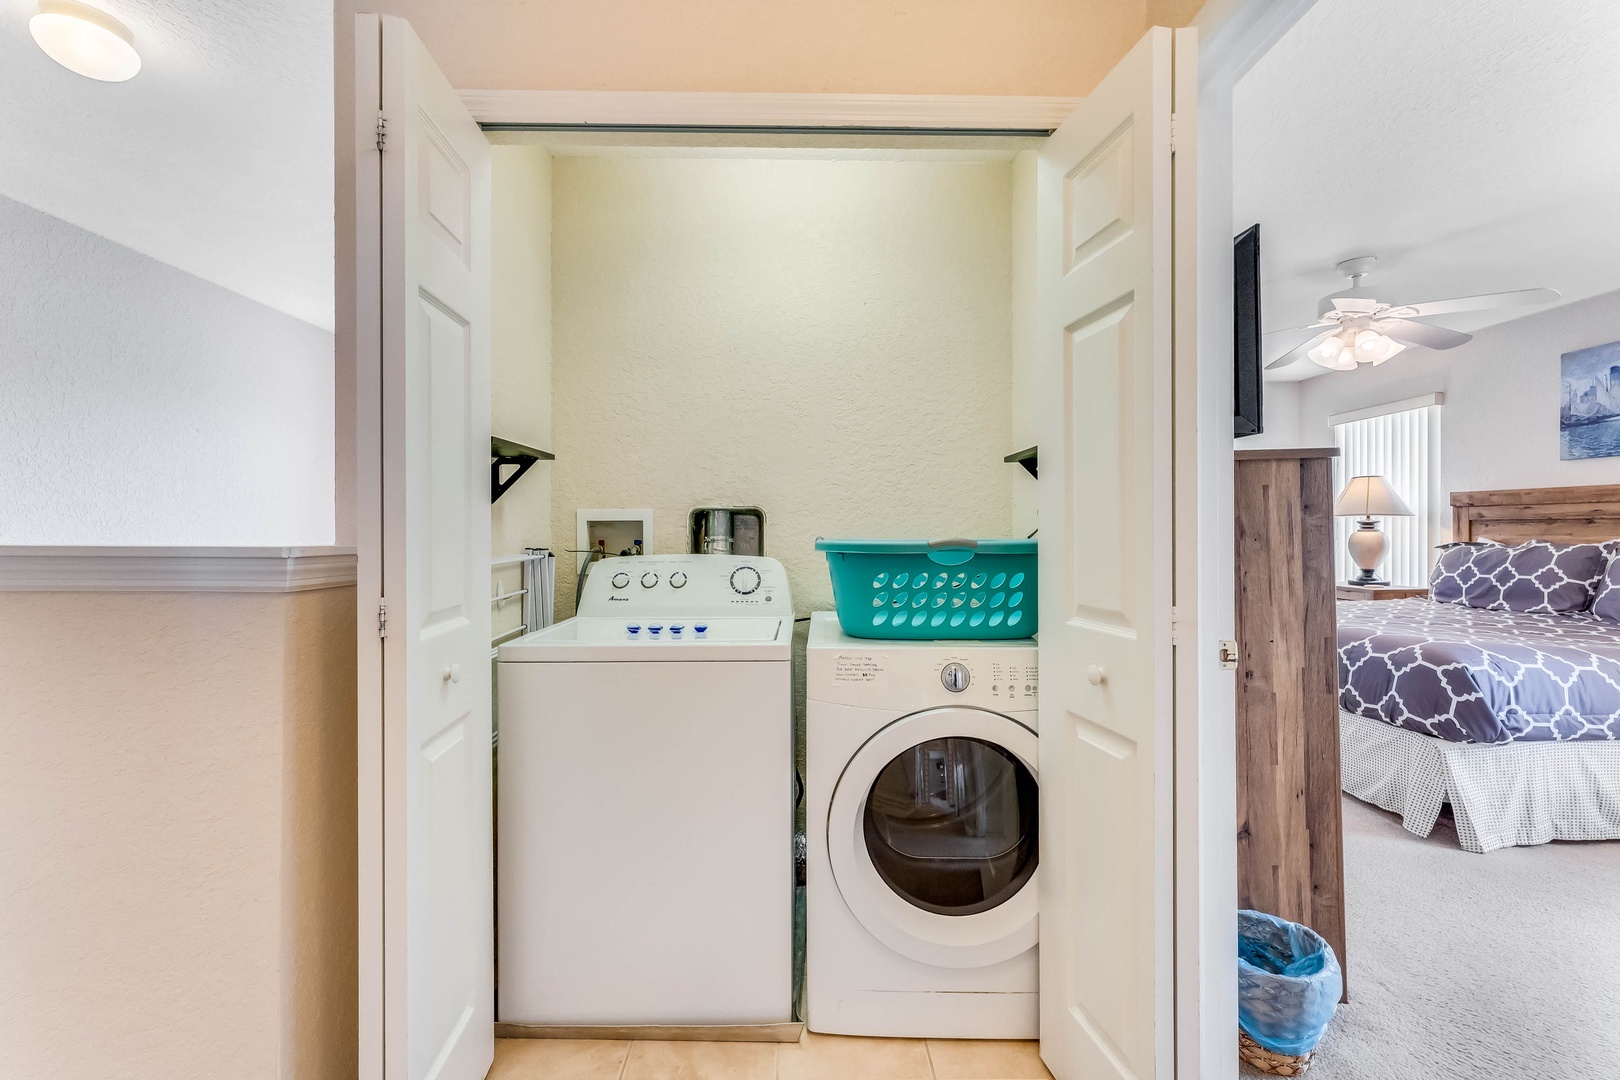 Private laundry is available for your stay, tucked away in the 2nd floor closet